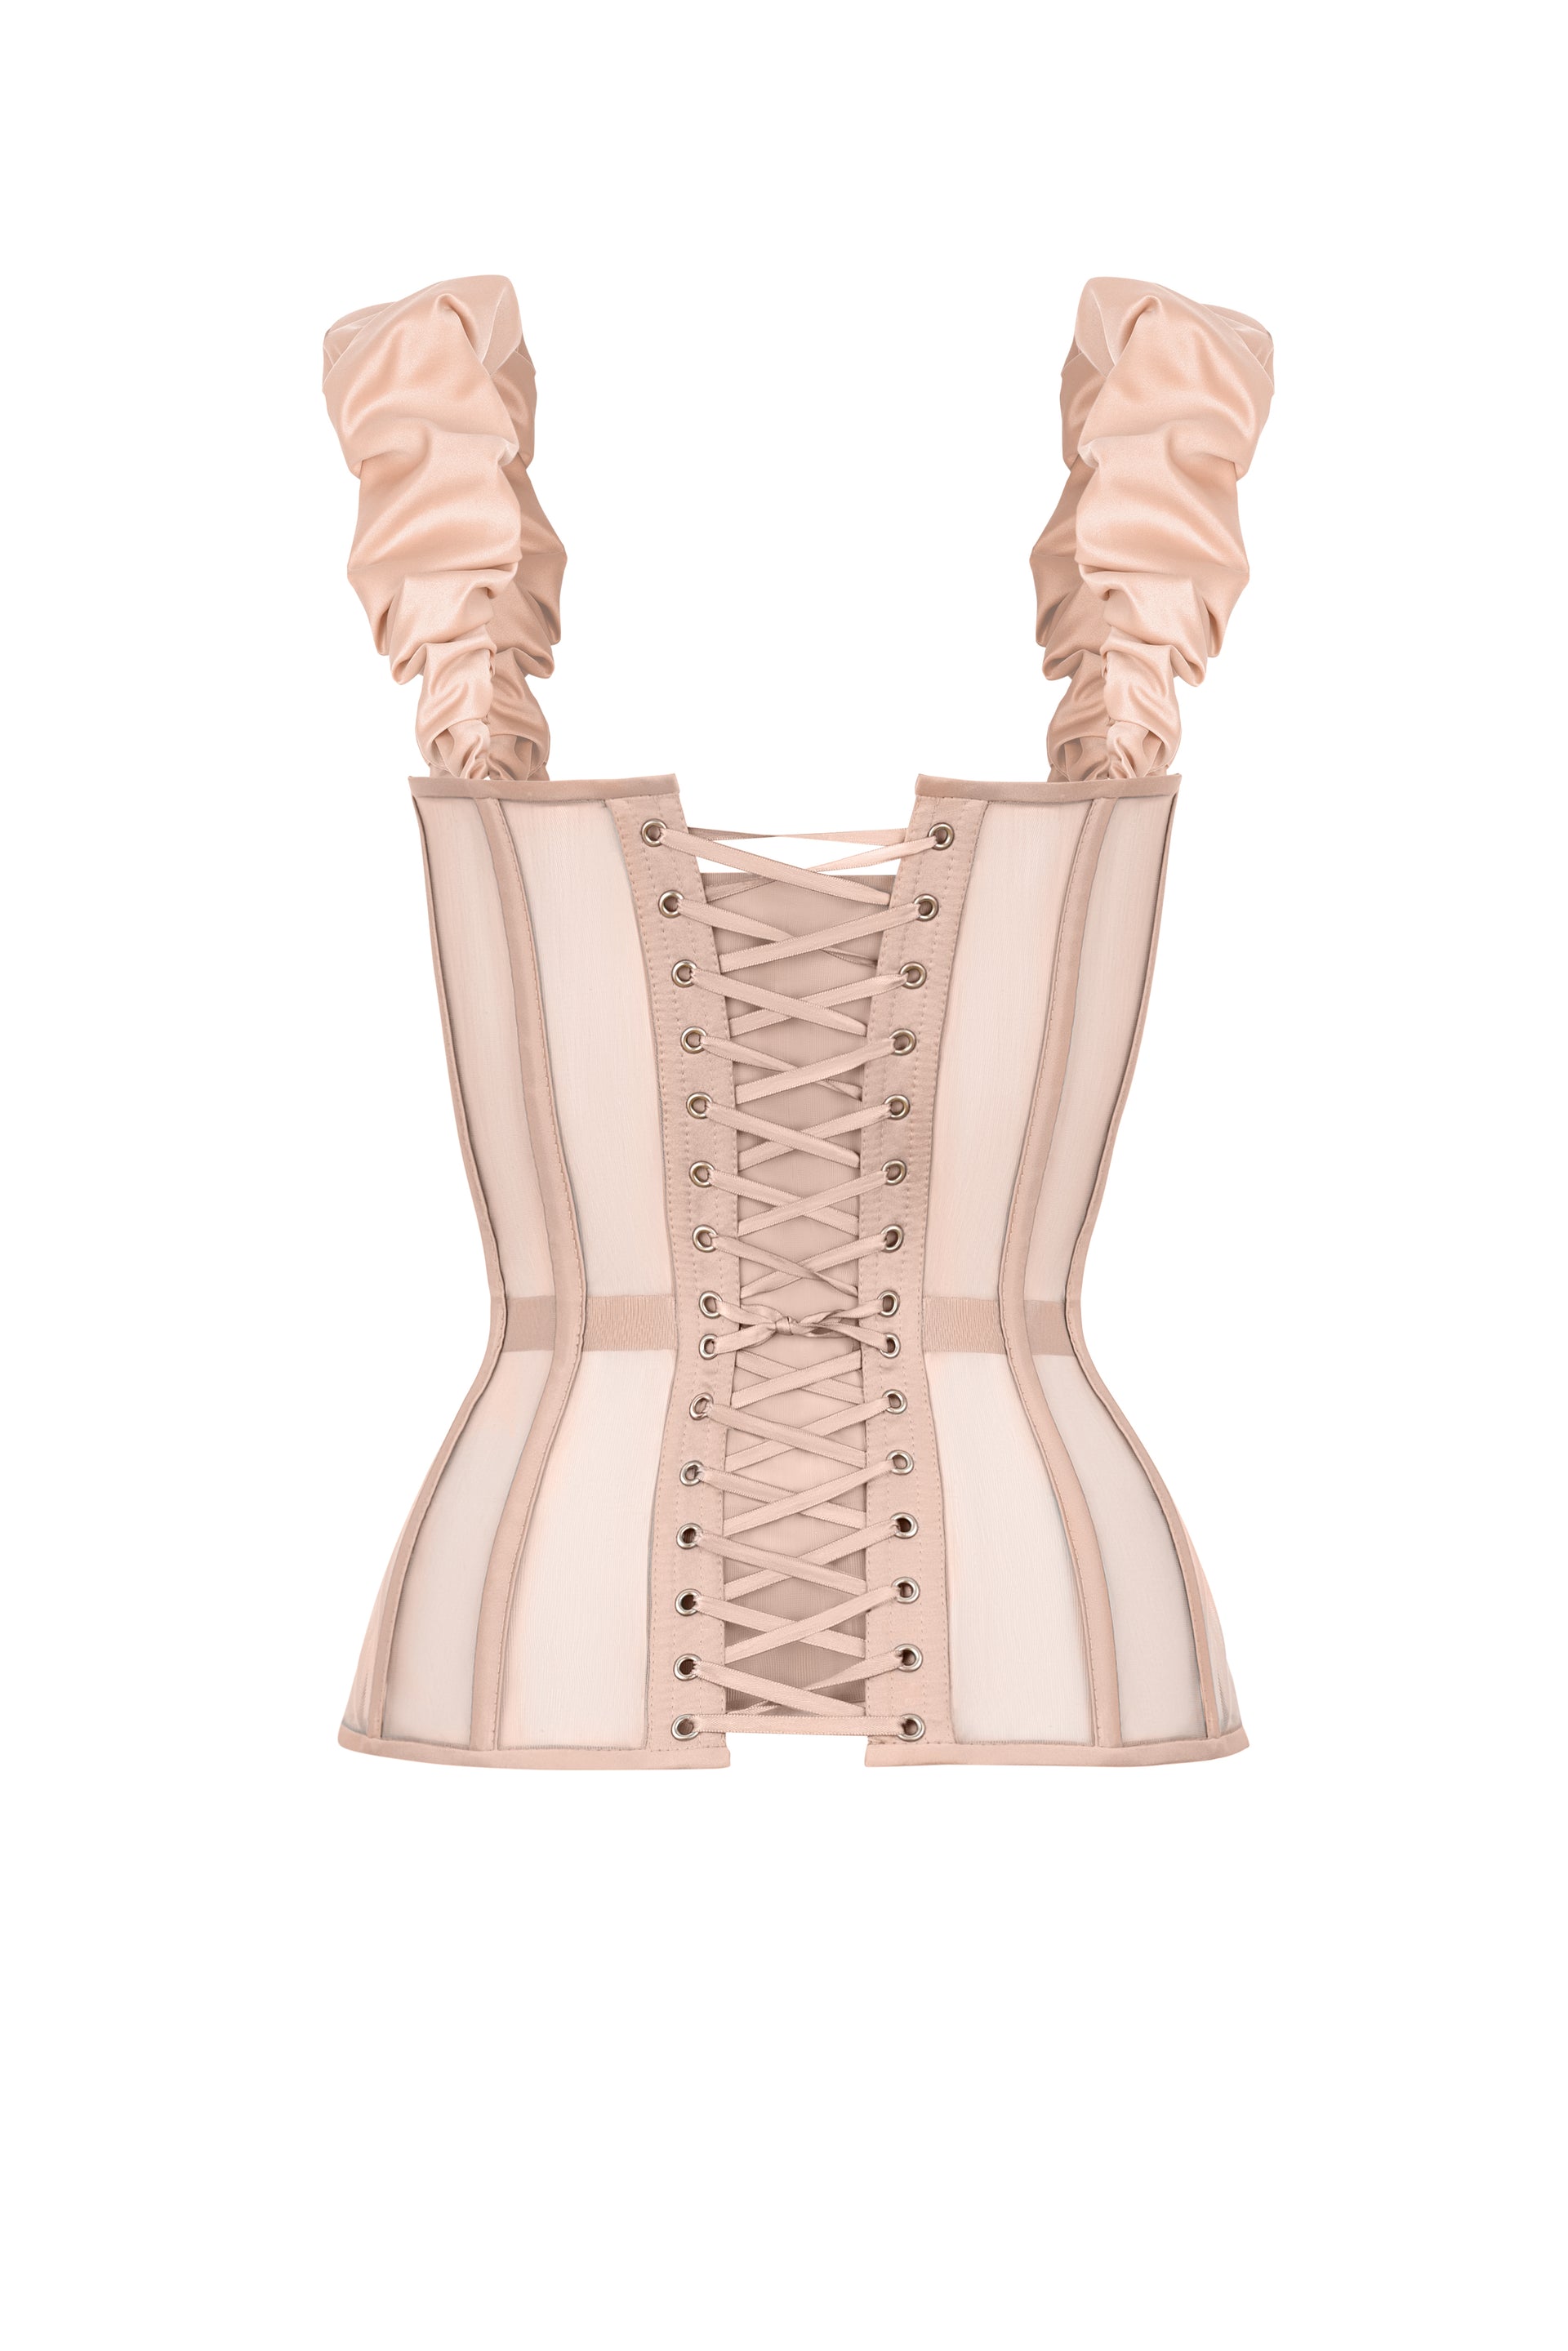 Beige satin corset with reliefs and detachable straps